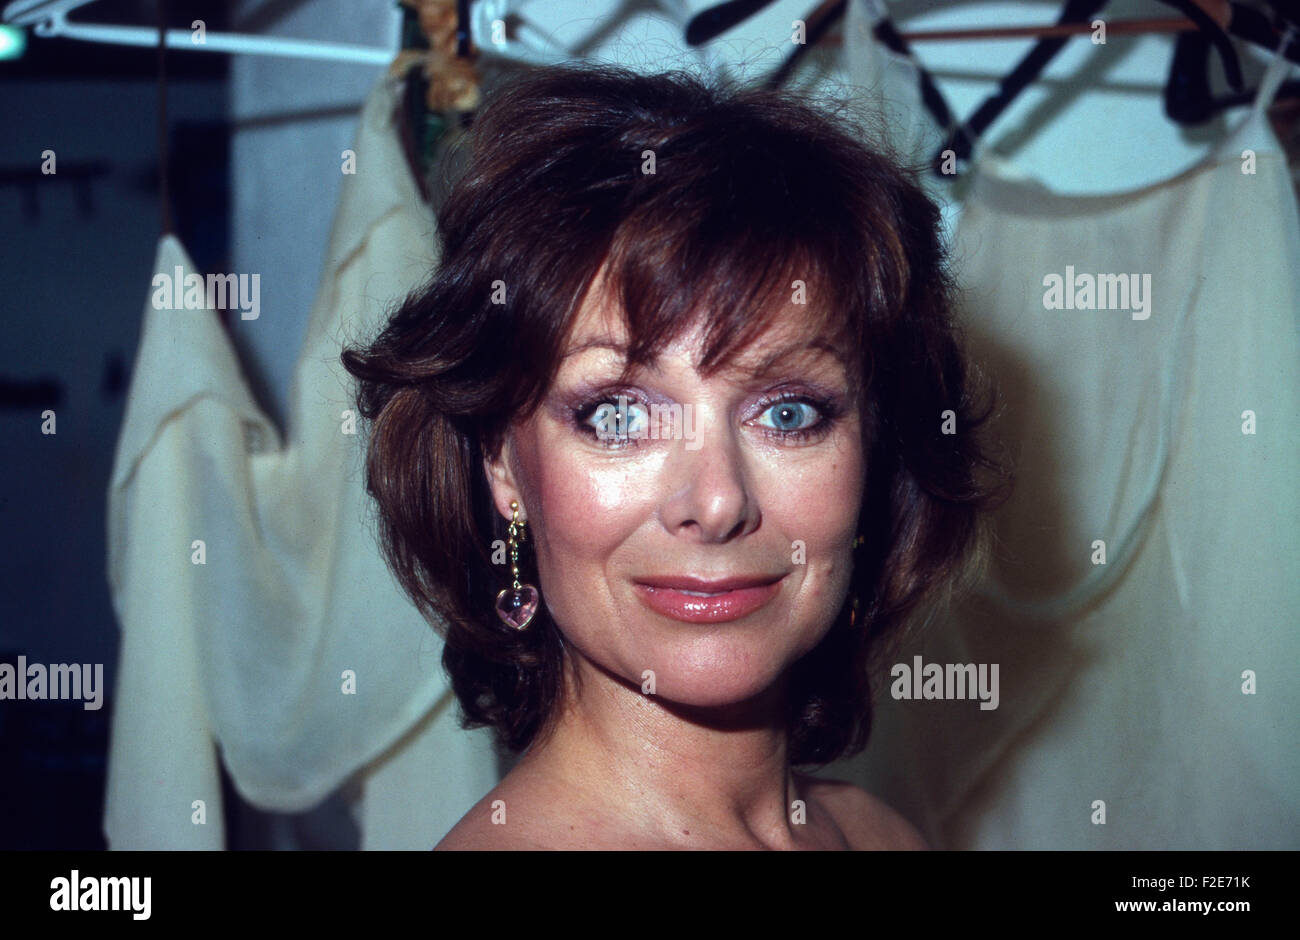 Actress Heide Keller High Resolution Stock Photography And Images Alamy